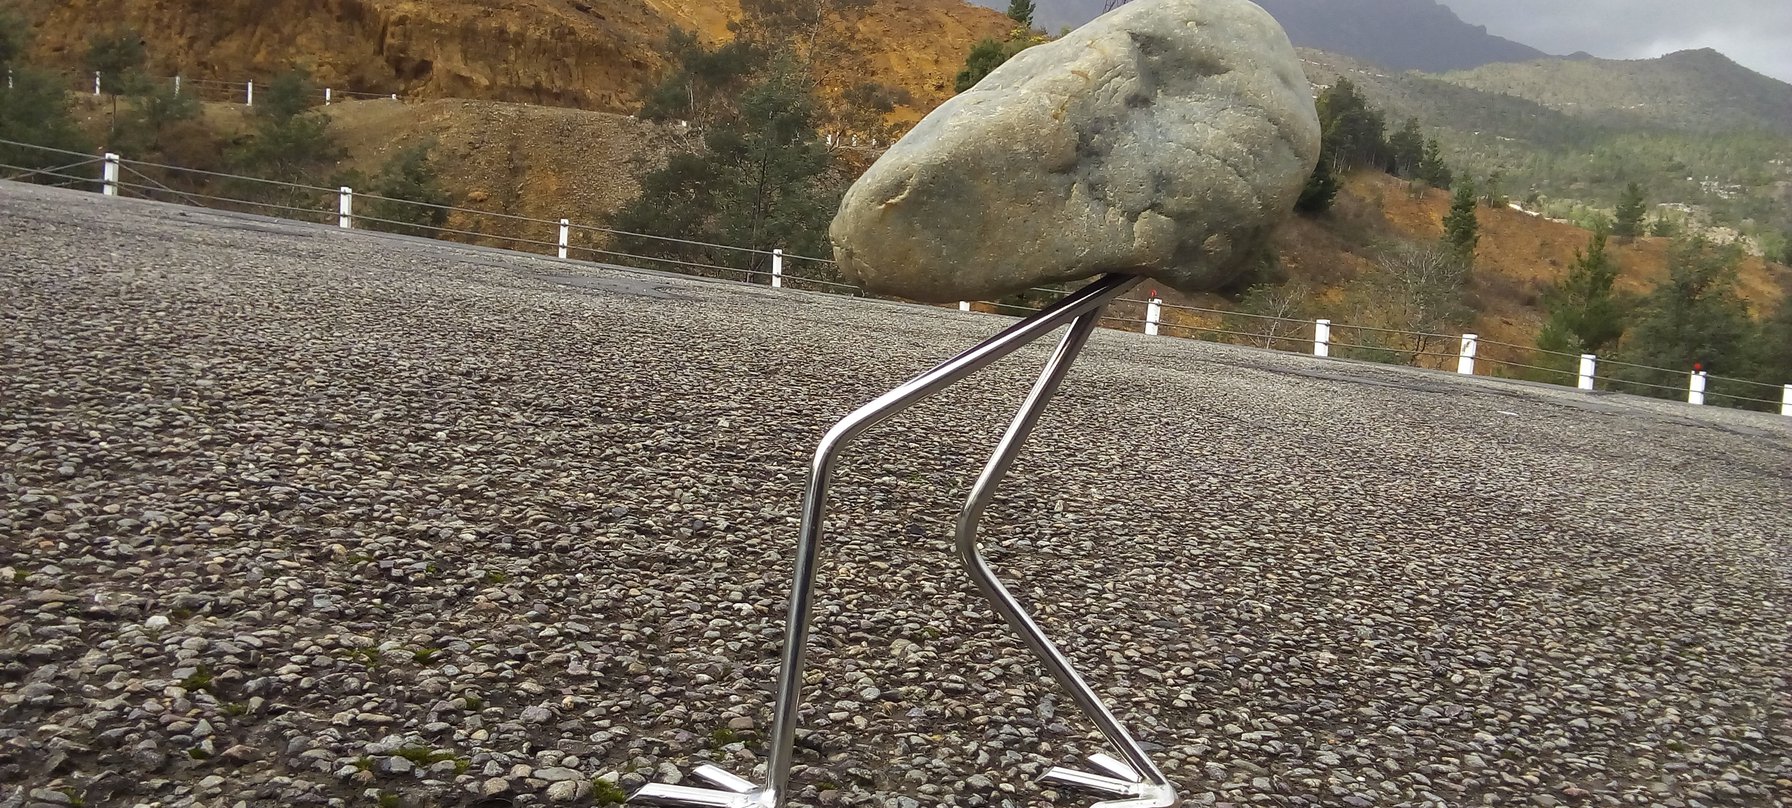 A photo of Colin Wilson's work - a small rock with metal legs is positioned to look as though is is walking up a hill. Credit Colin Wilson.